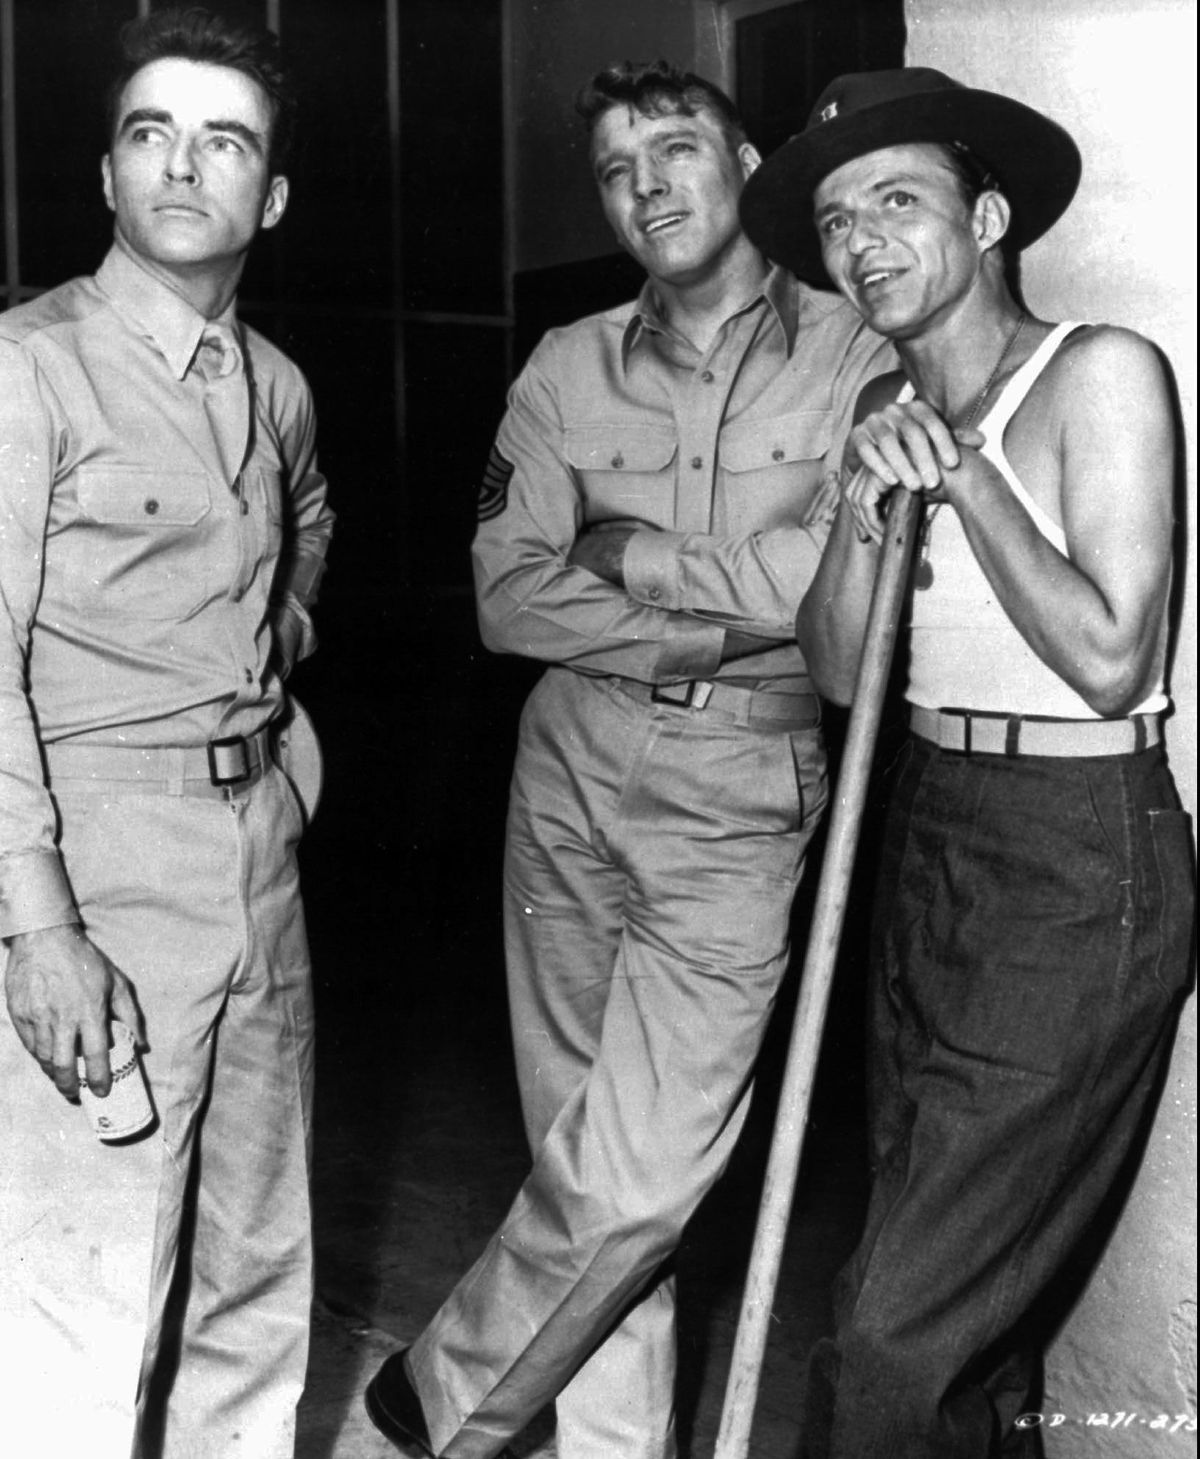 Frank Sinatra, right, stands with fellow actors Montgomery Cliff, left, and Burt Lancaster in this scene from the film “From Here to Eternity.” Sinatra’s performance won him an Oscar as best supporting actor in 1953. (Associated Press)